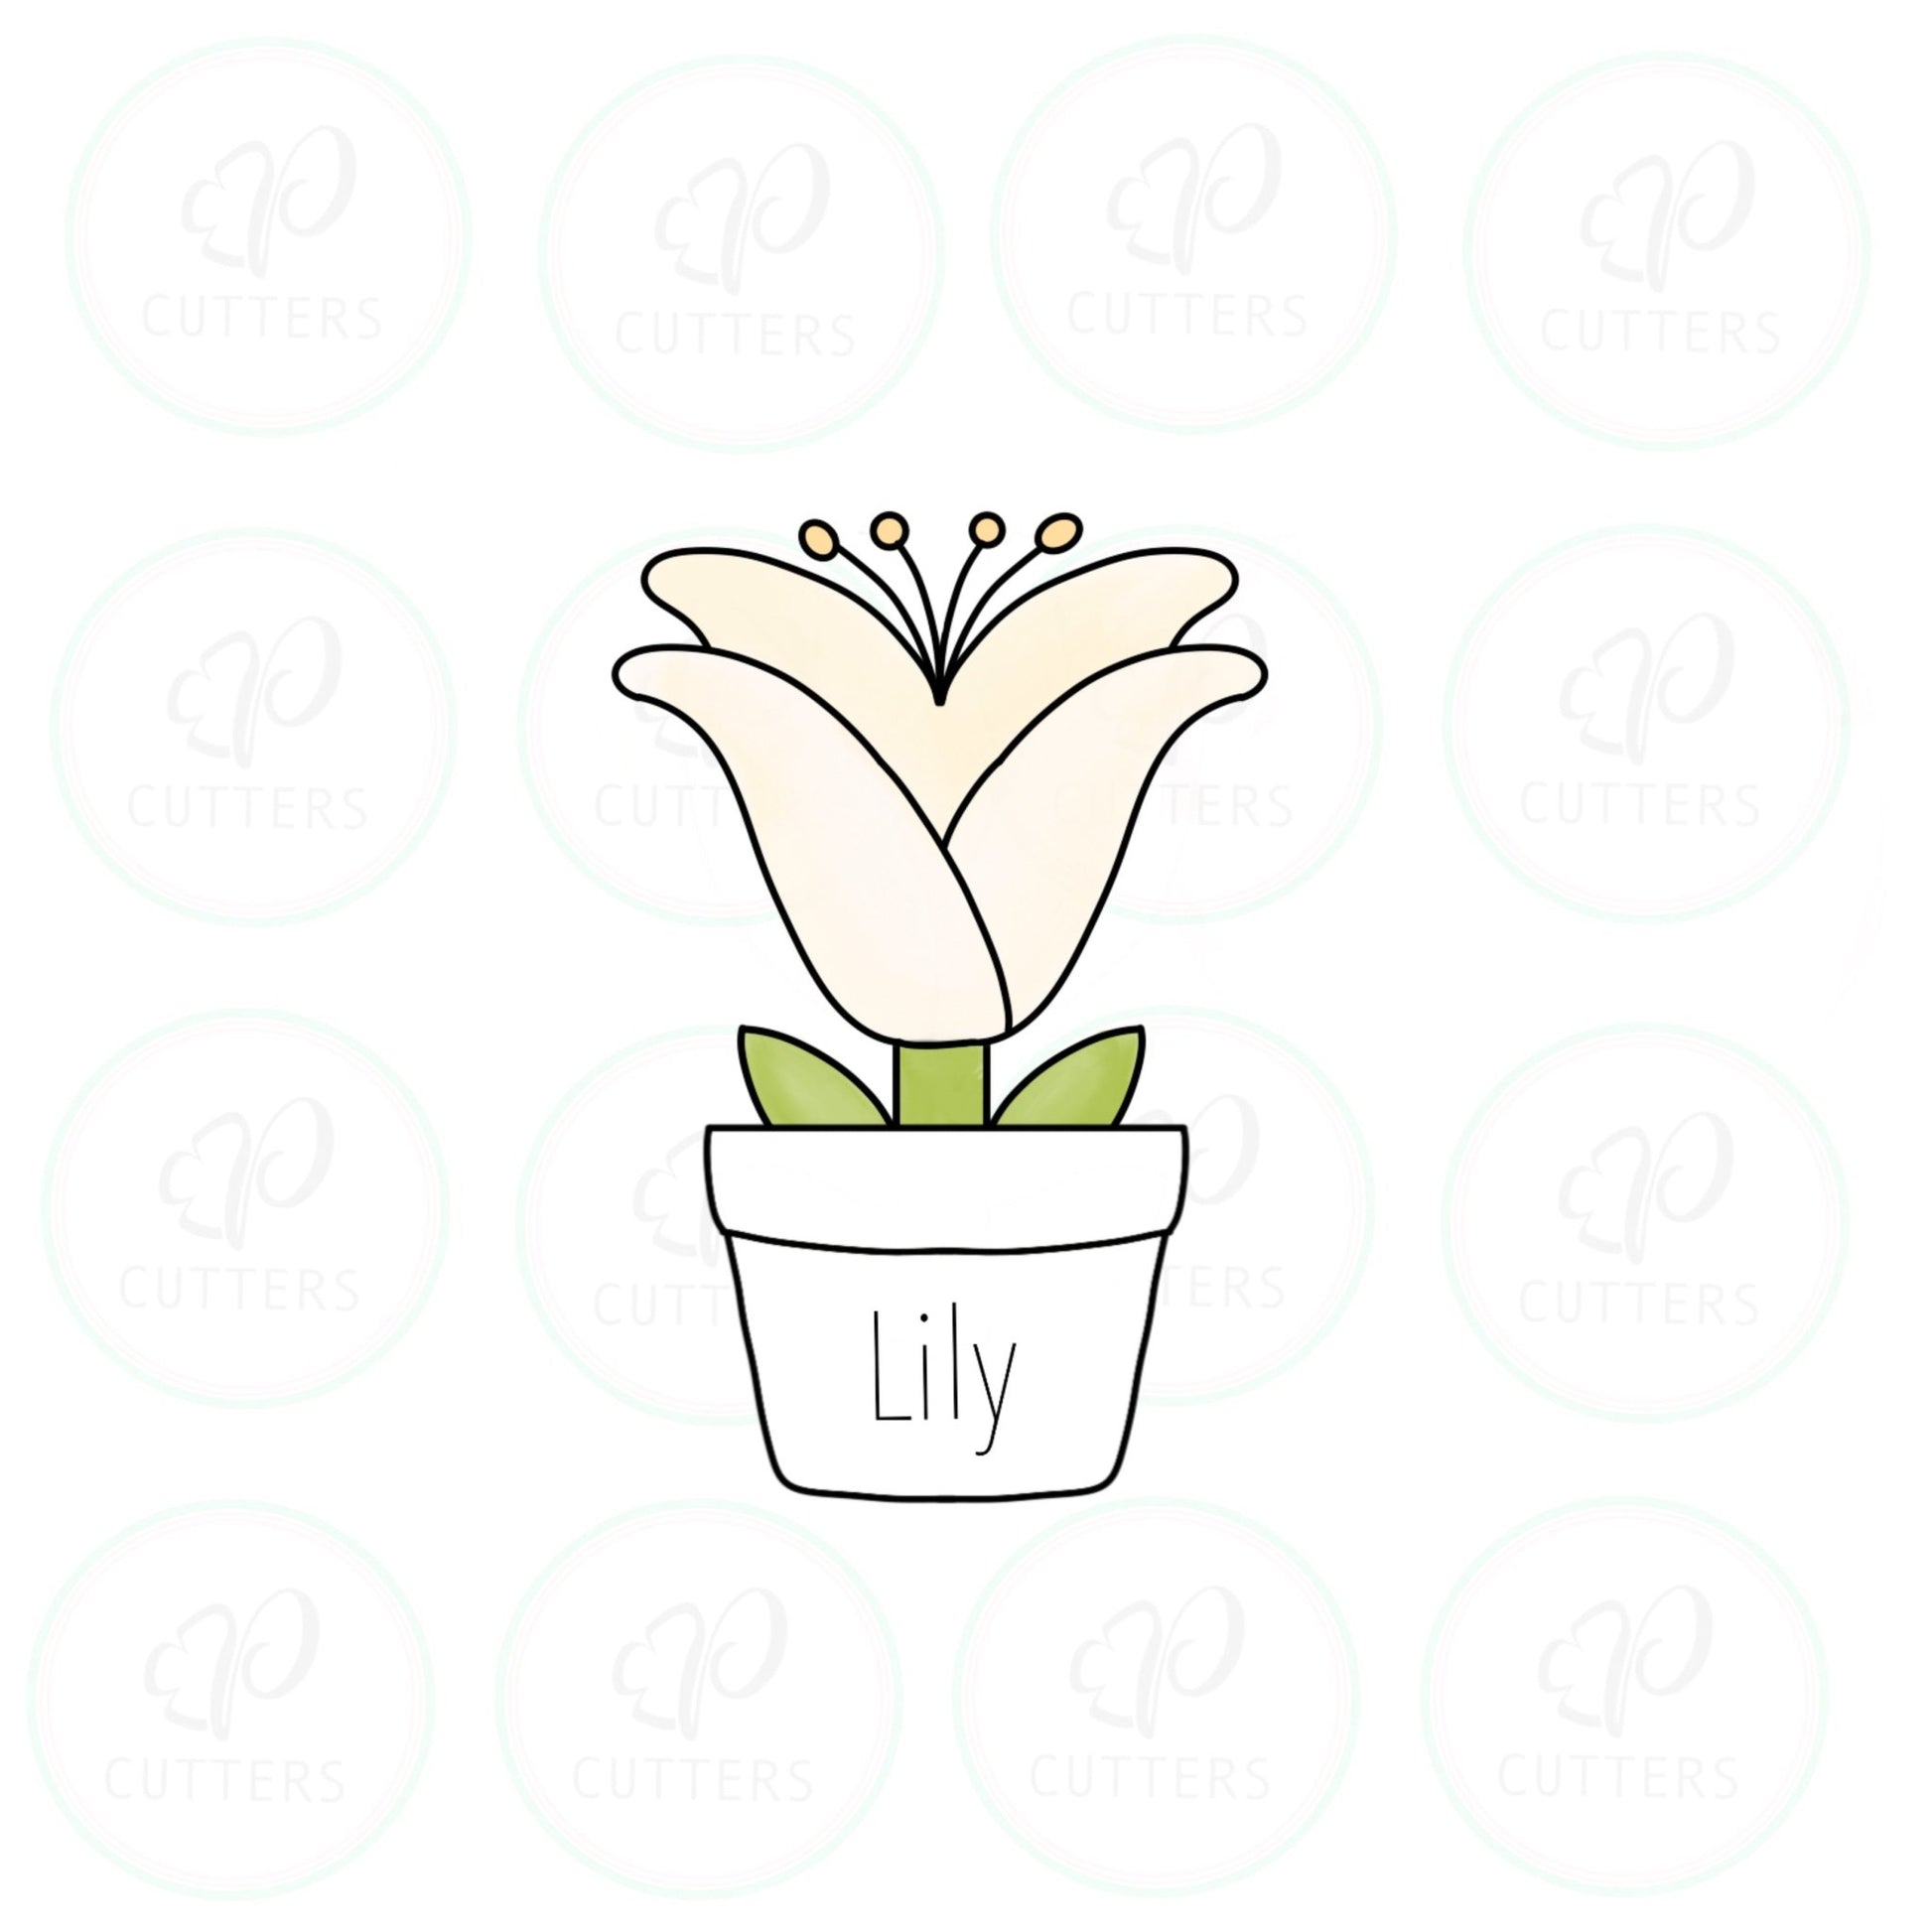 Lily Flower in a Pot Cookie Cutter - Periwinkles Cutters